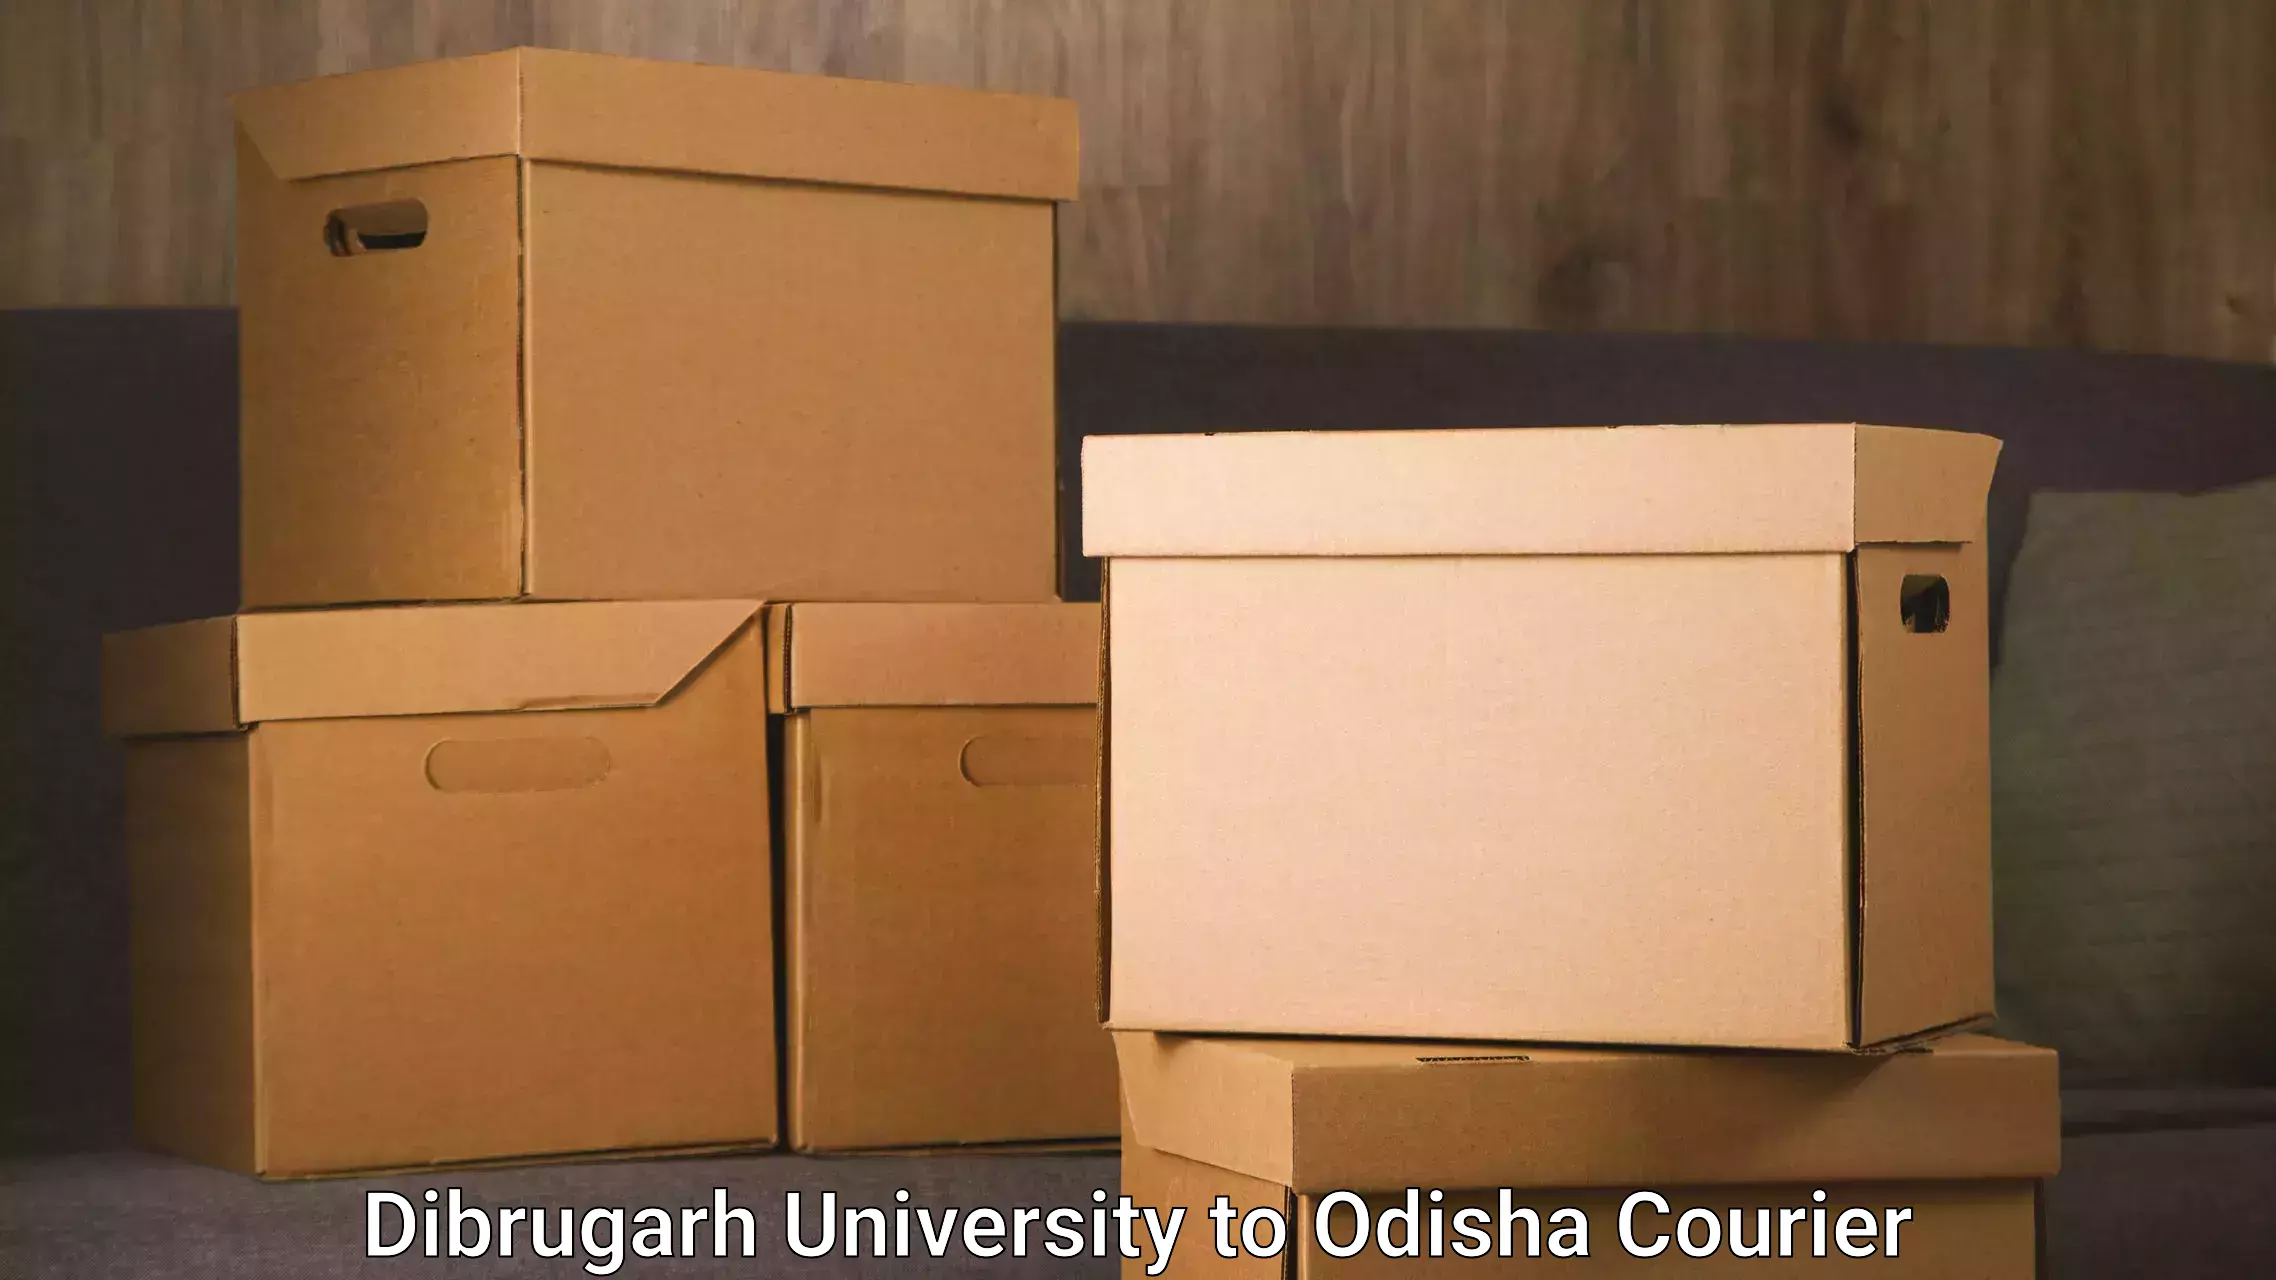 Express delivery solutions Dibrugarh University to Balinga